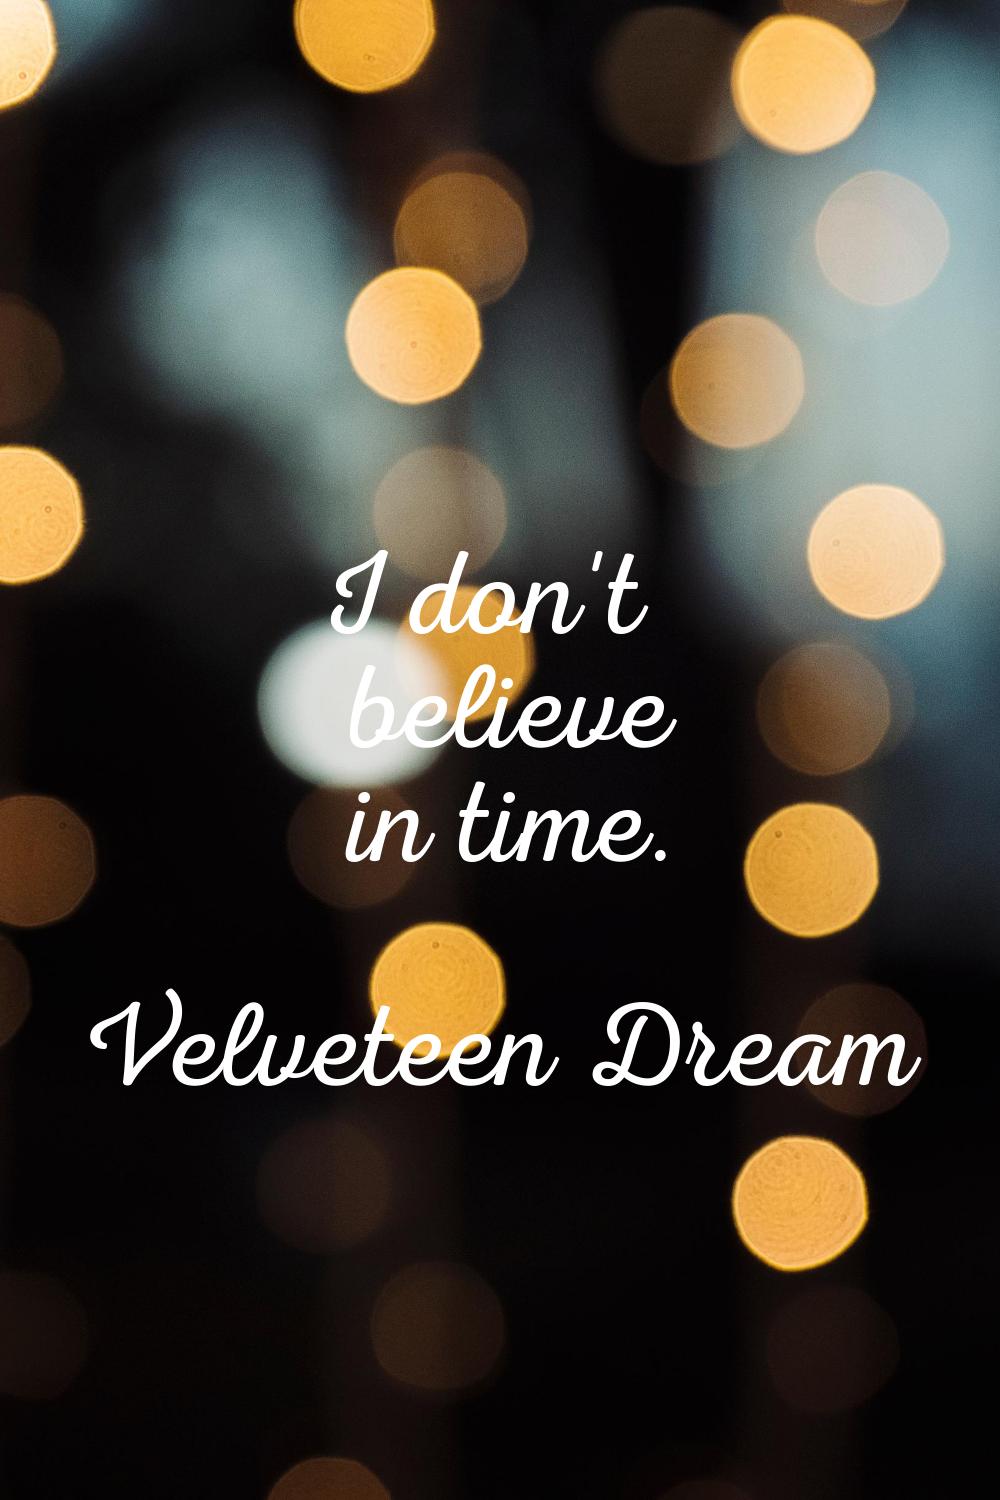 I don't believe in time.